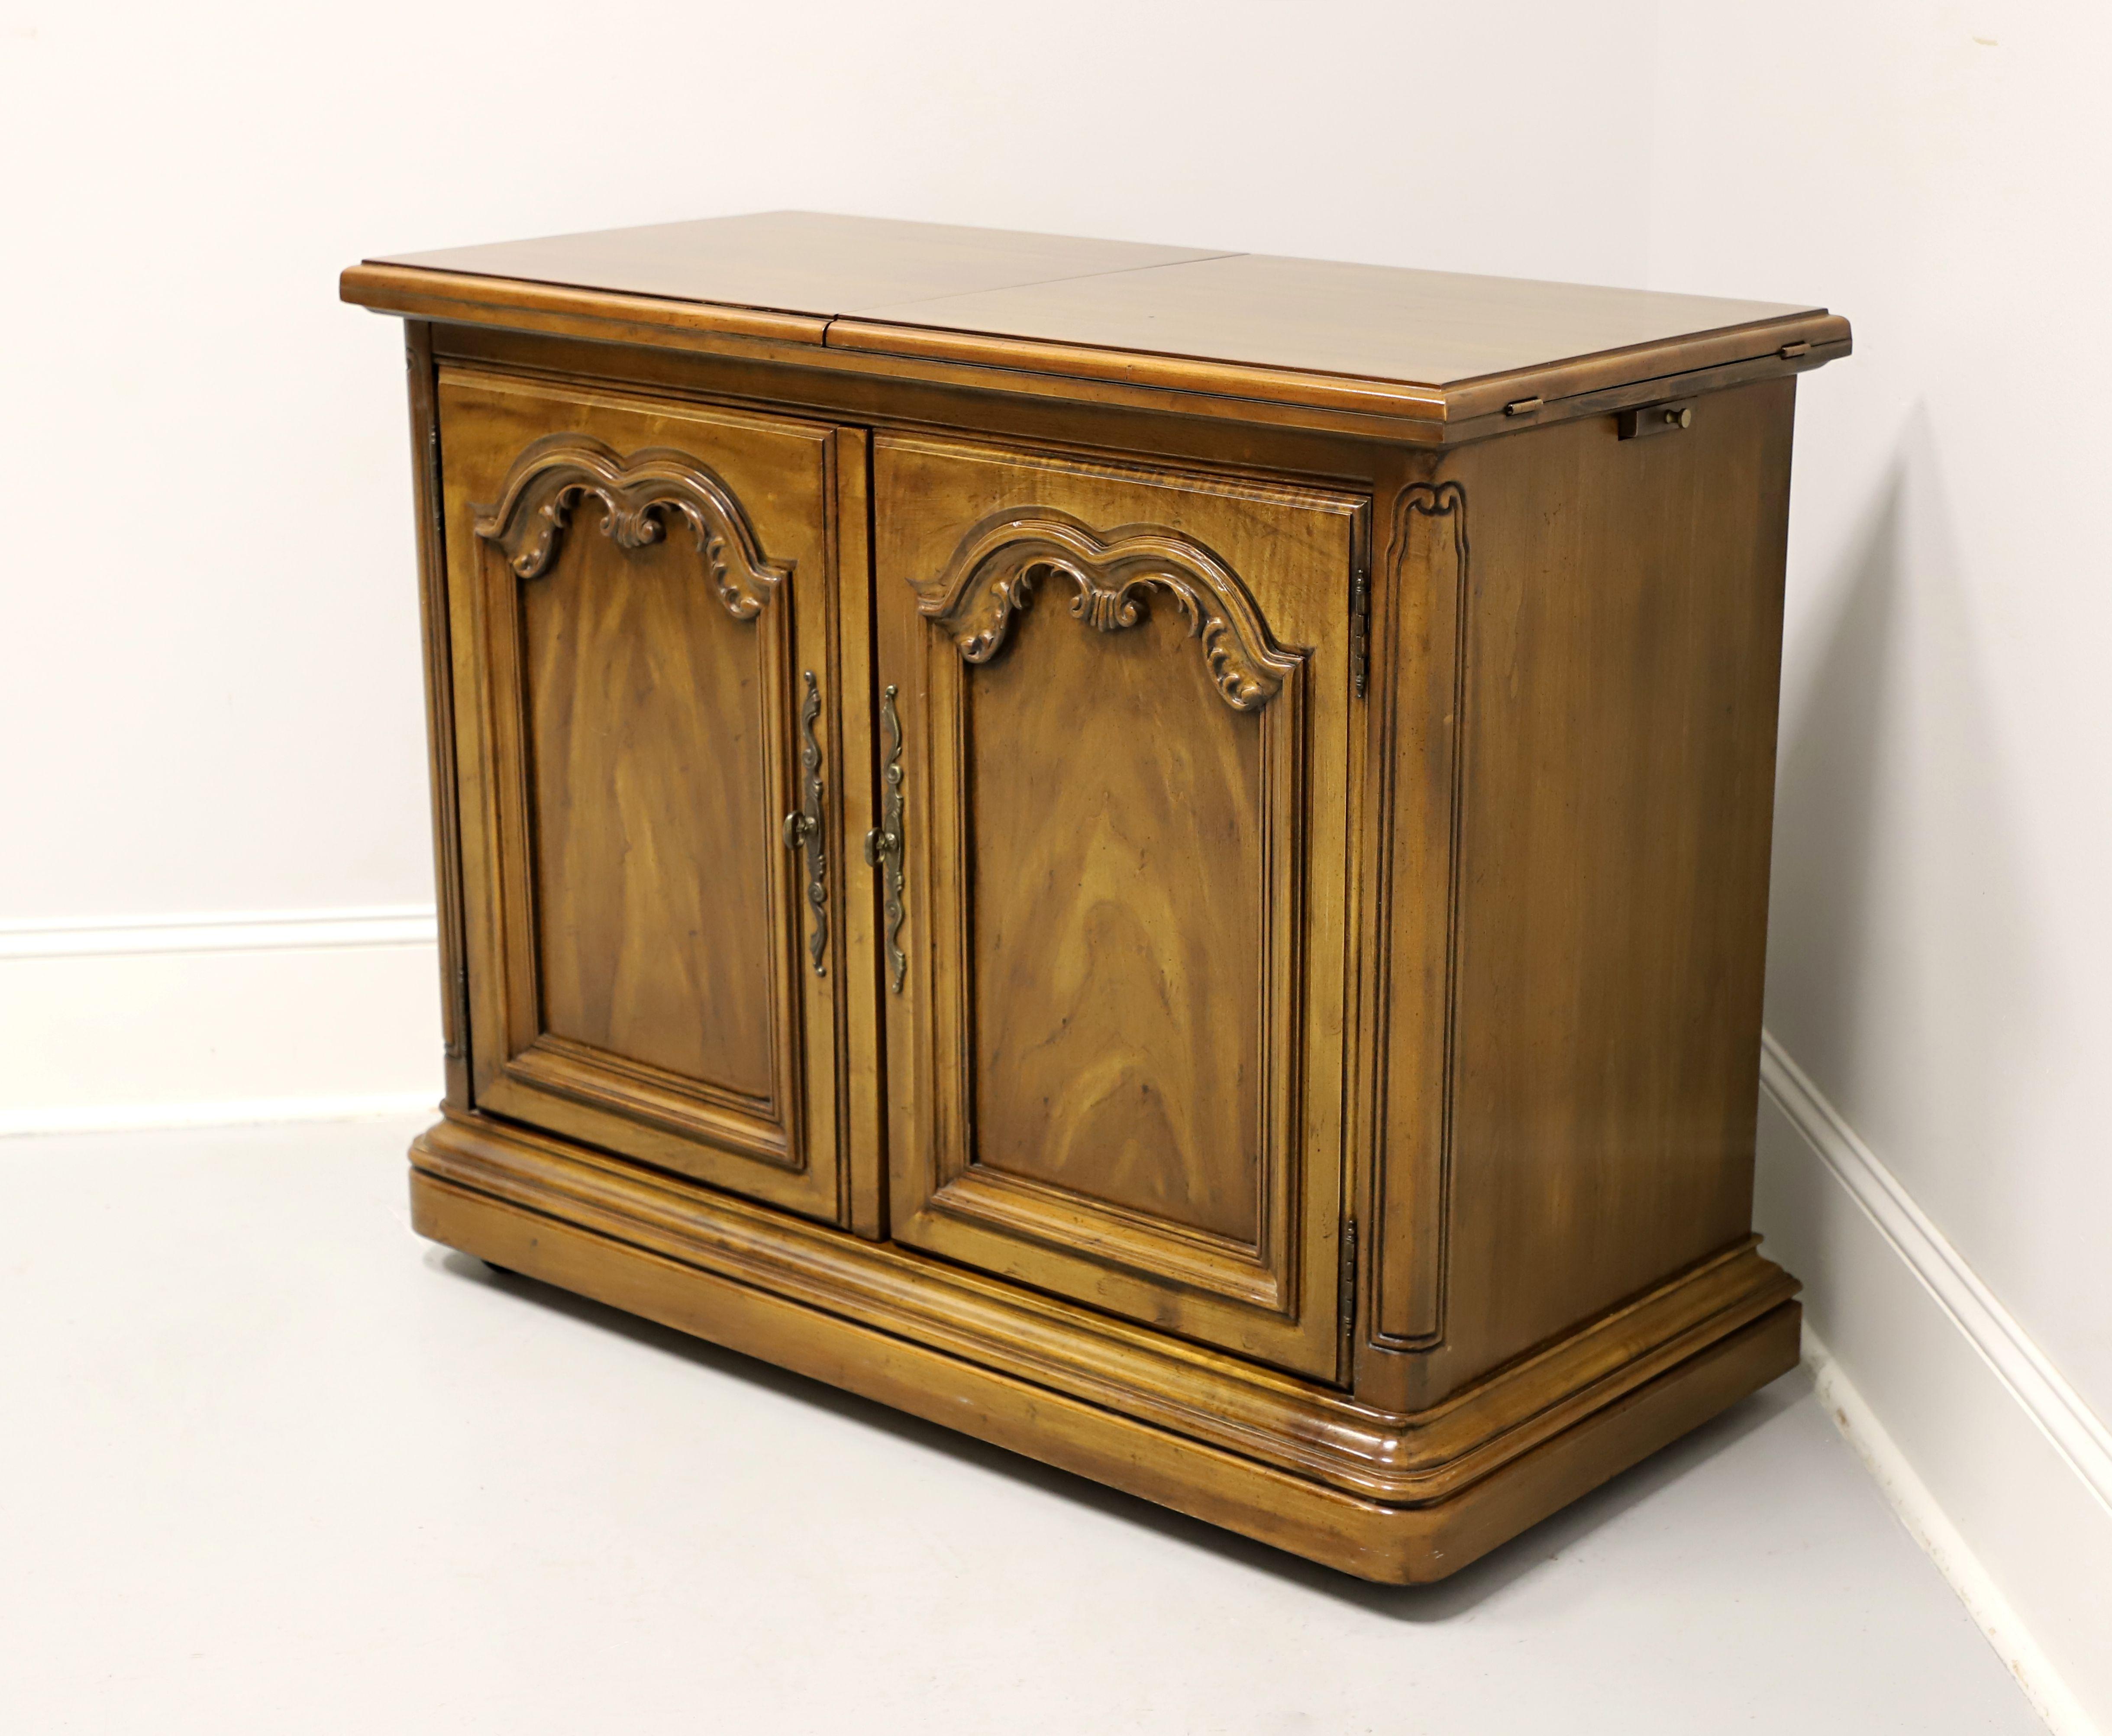 French Provincial DREXEL Touraine II Pecan French Country Flip Top Server on Casters